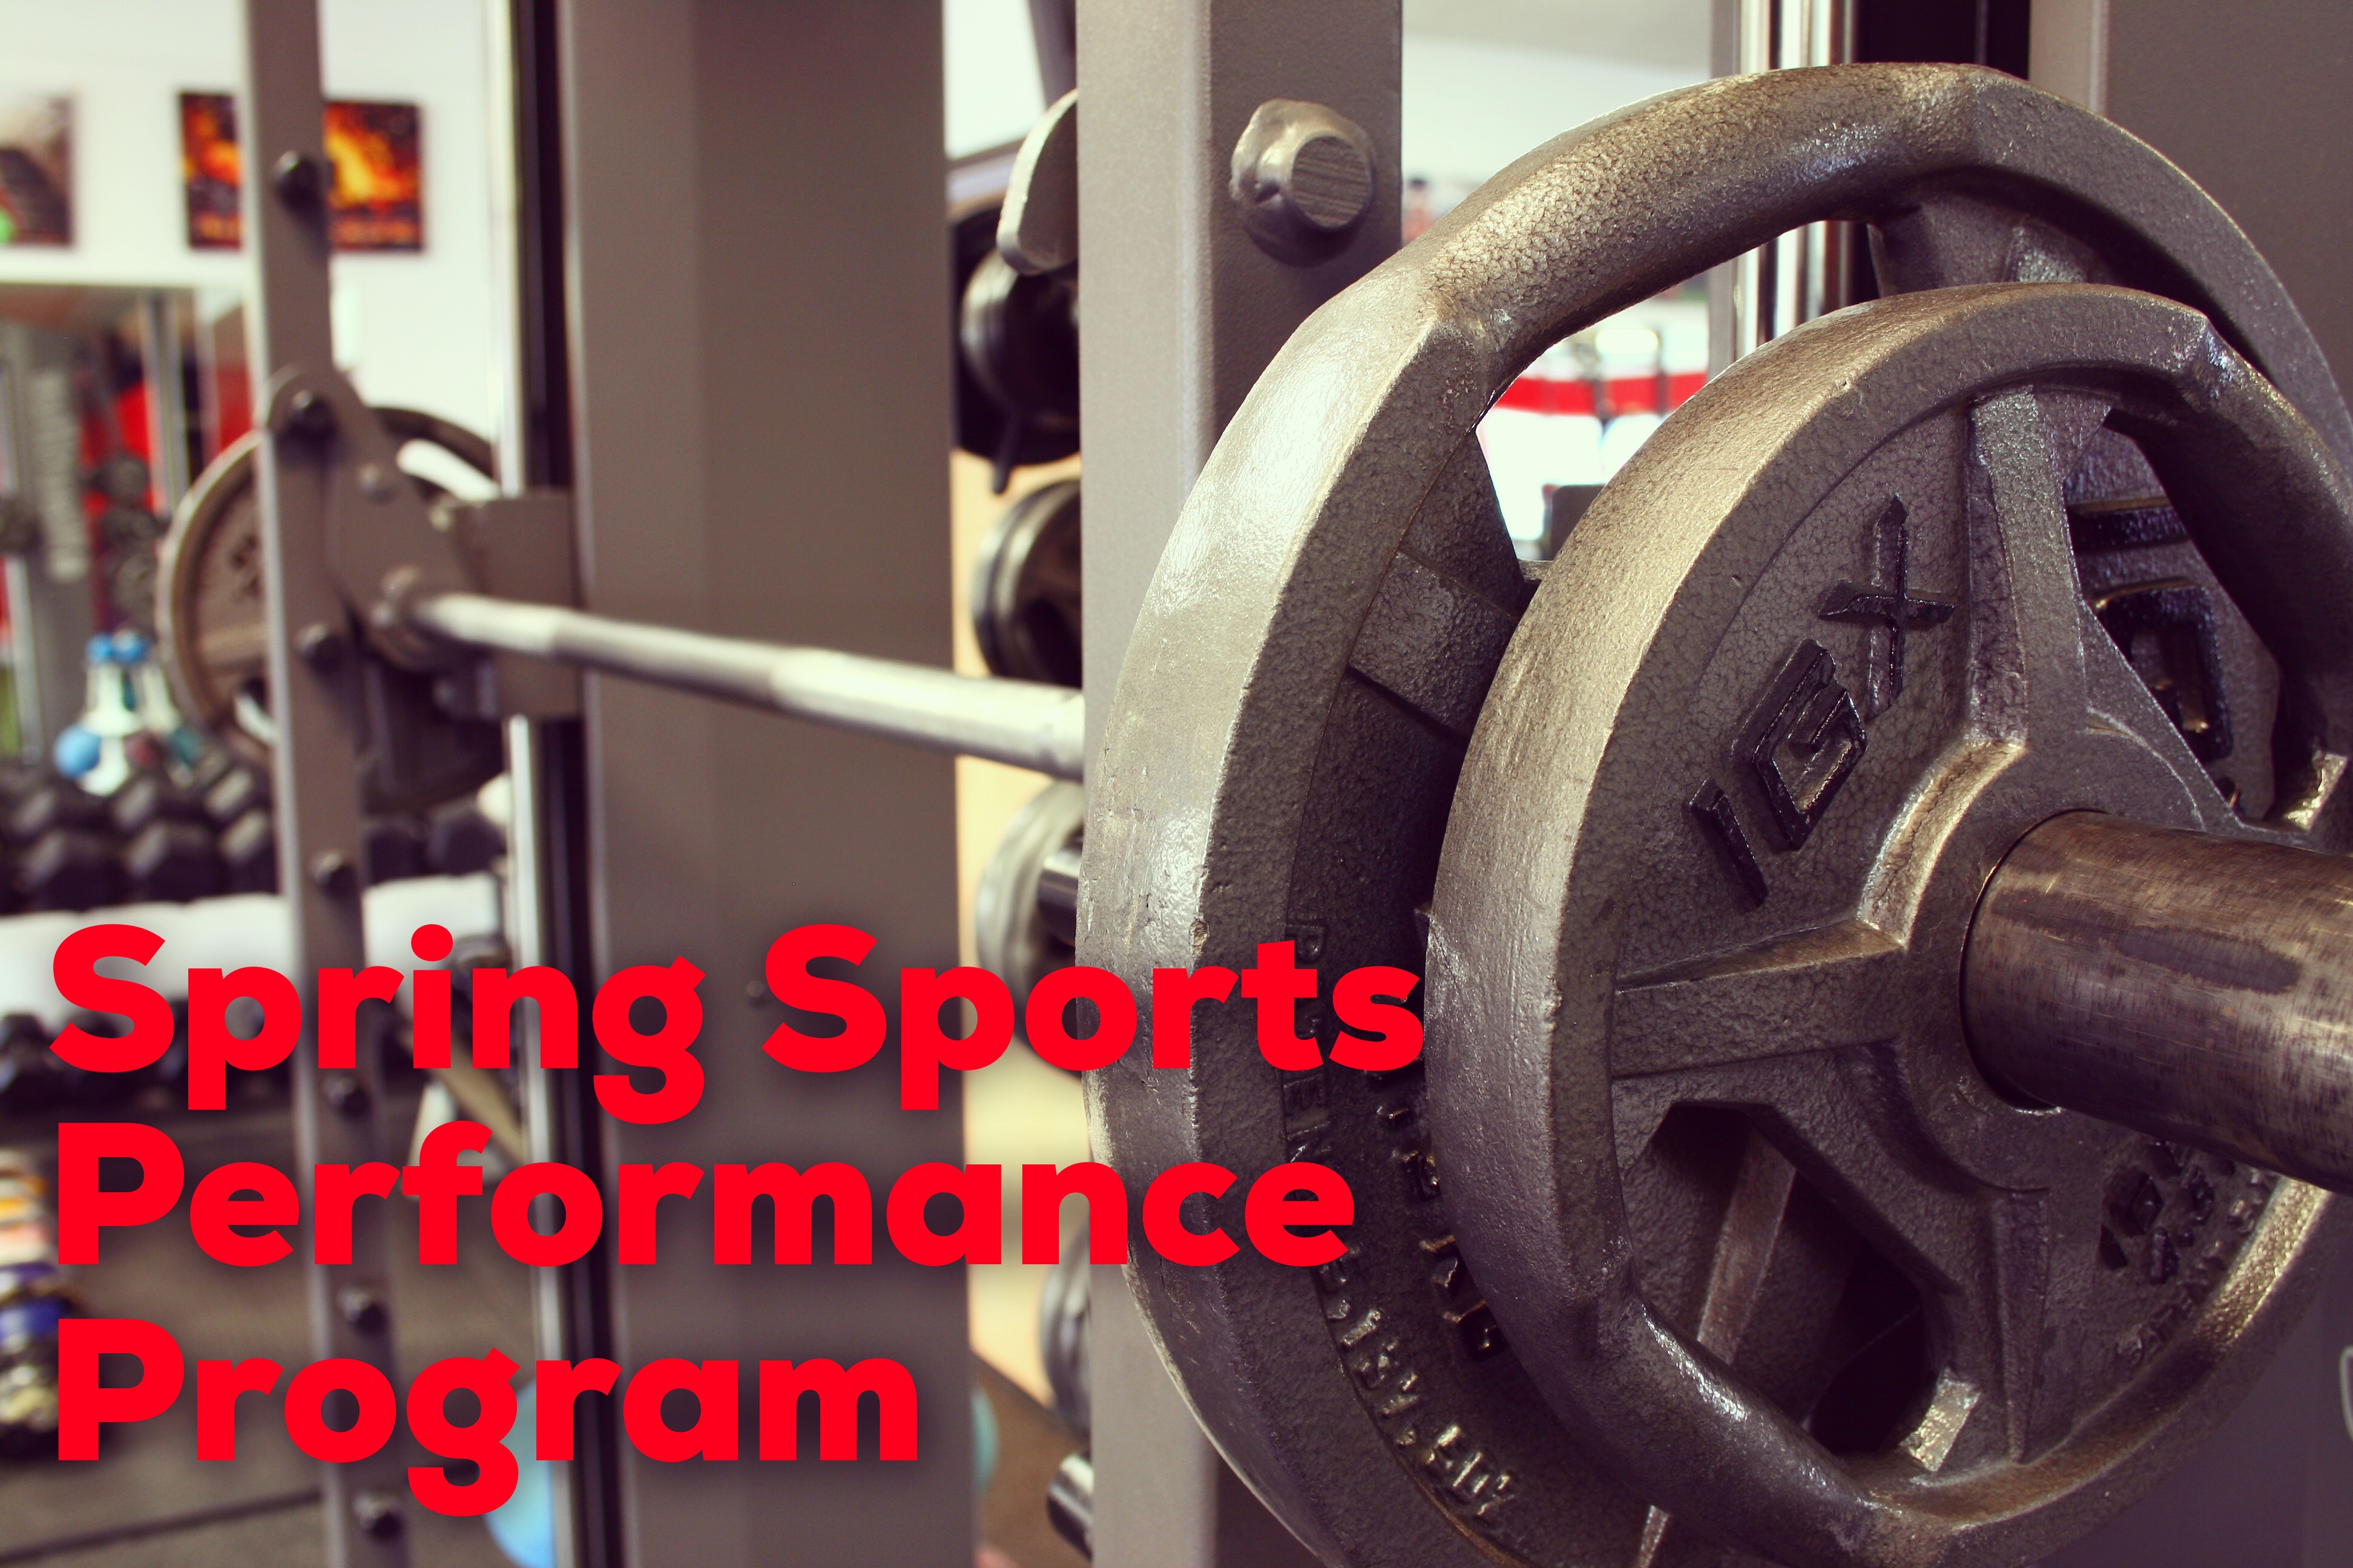 
Spring 2018 Sports Performance Registration is OPEN!